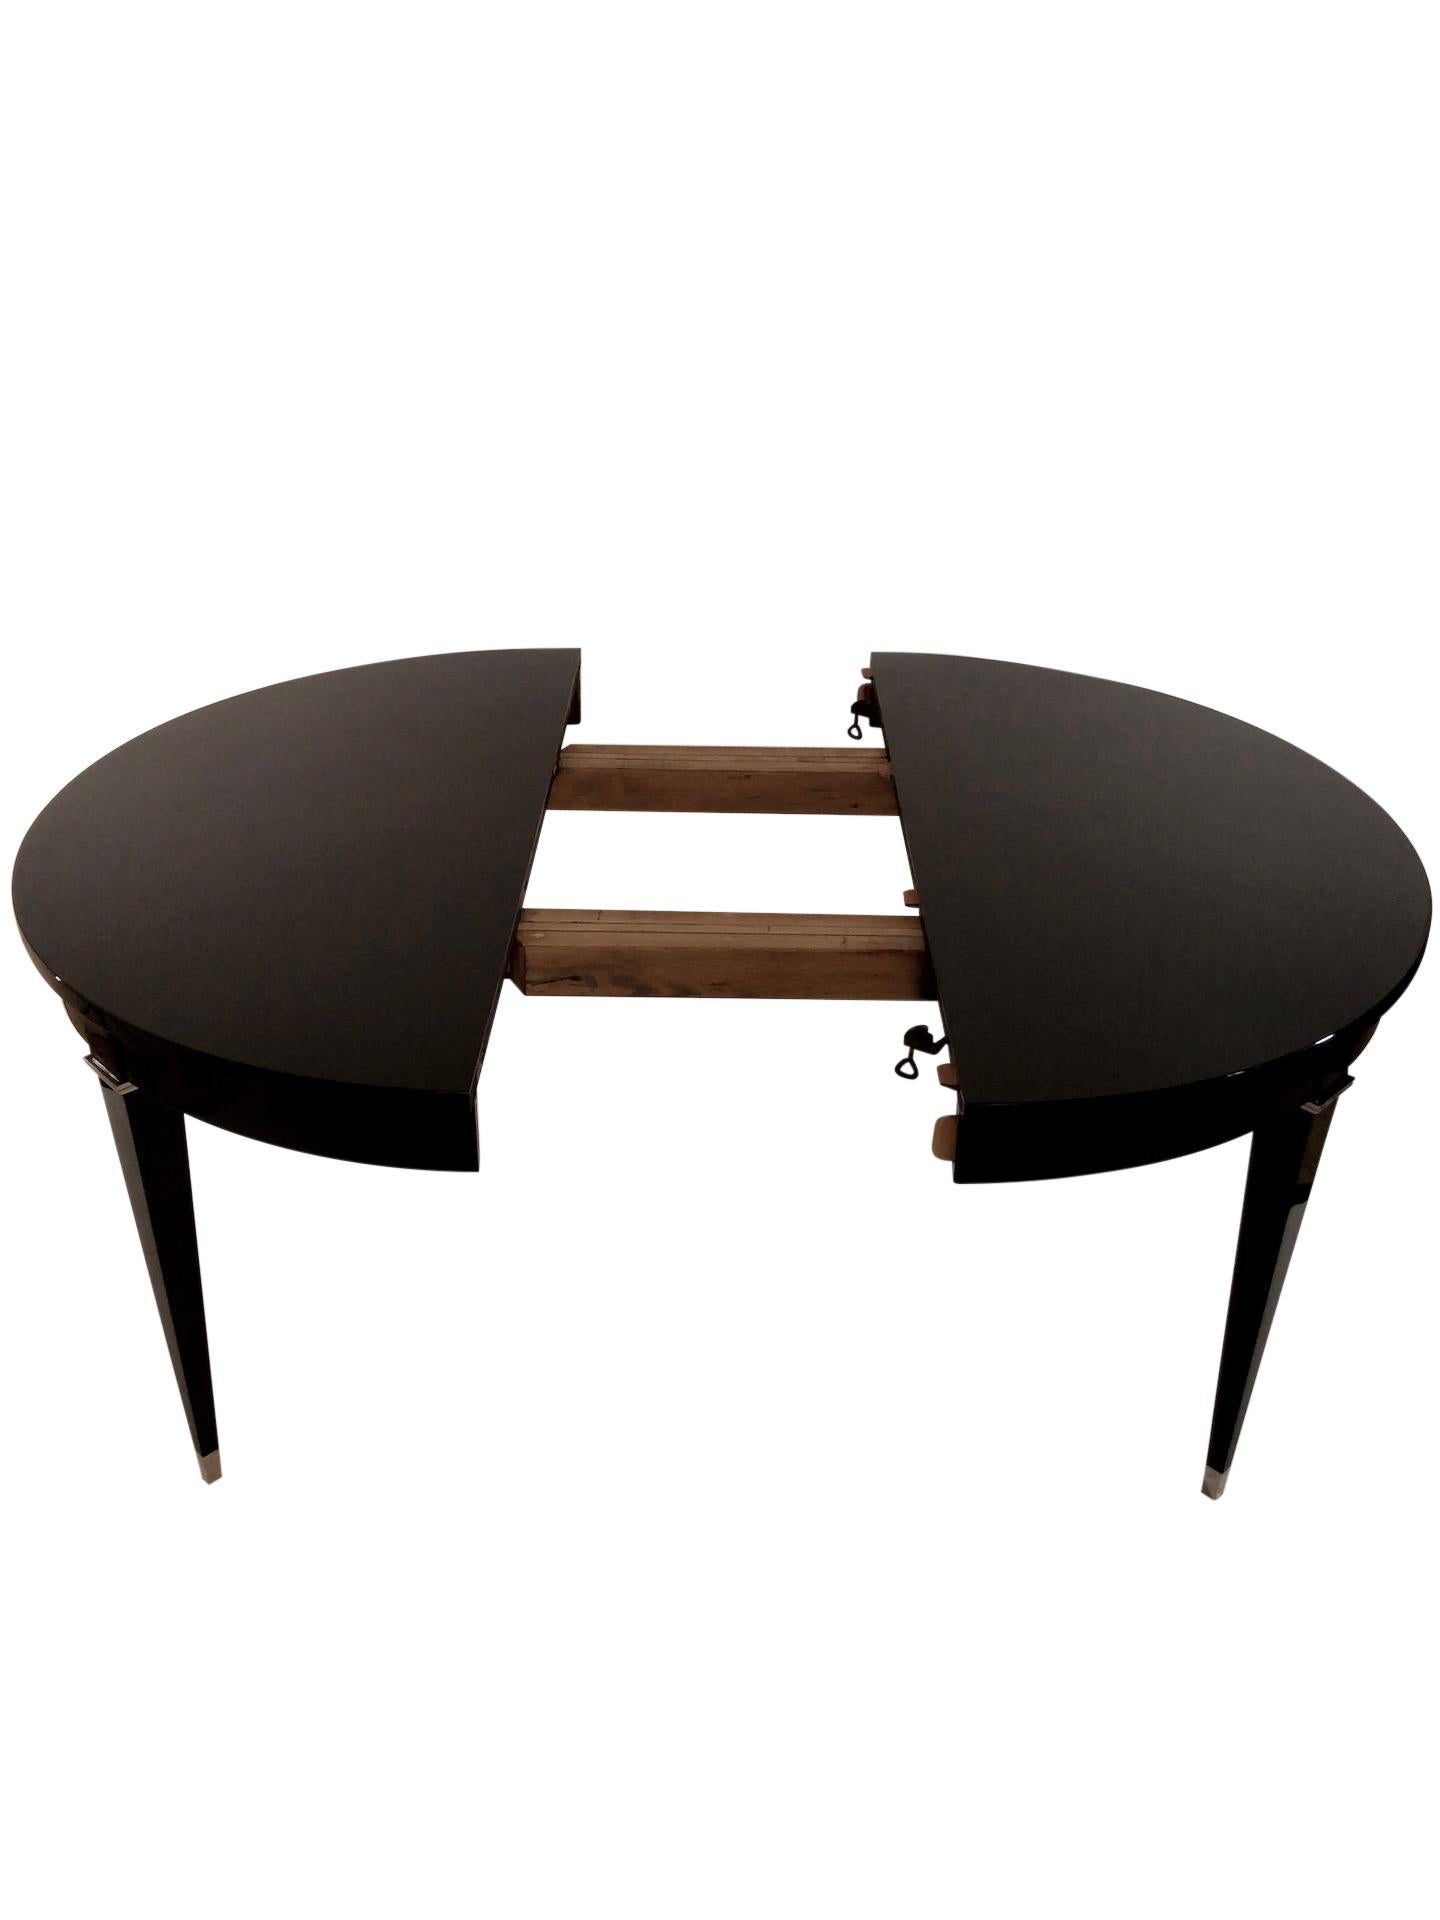 Blackened Round Dining Table with Extension in Black Lacquer with Nickeled Metal Fittings For Sale